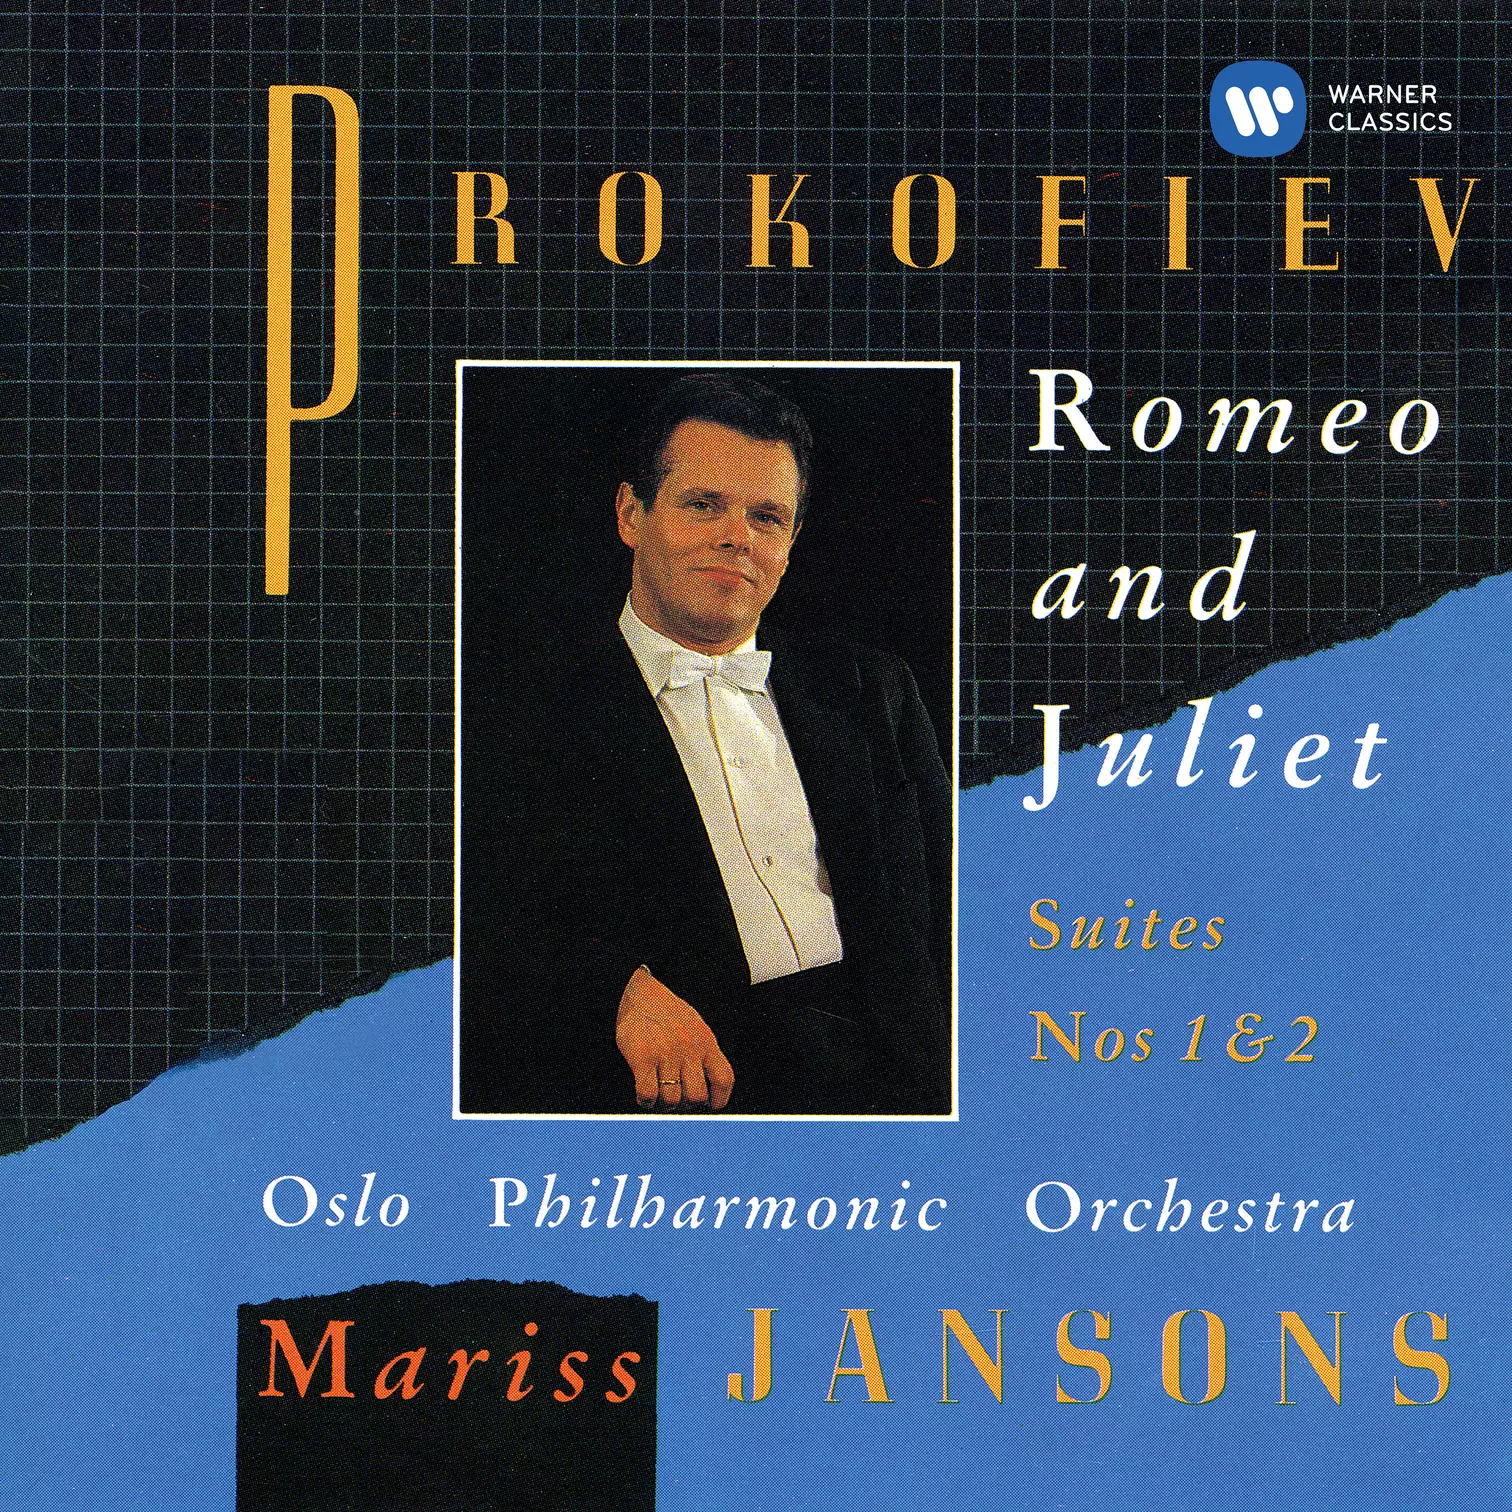 Prokofiev: Suites from Romeo and Juliet